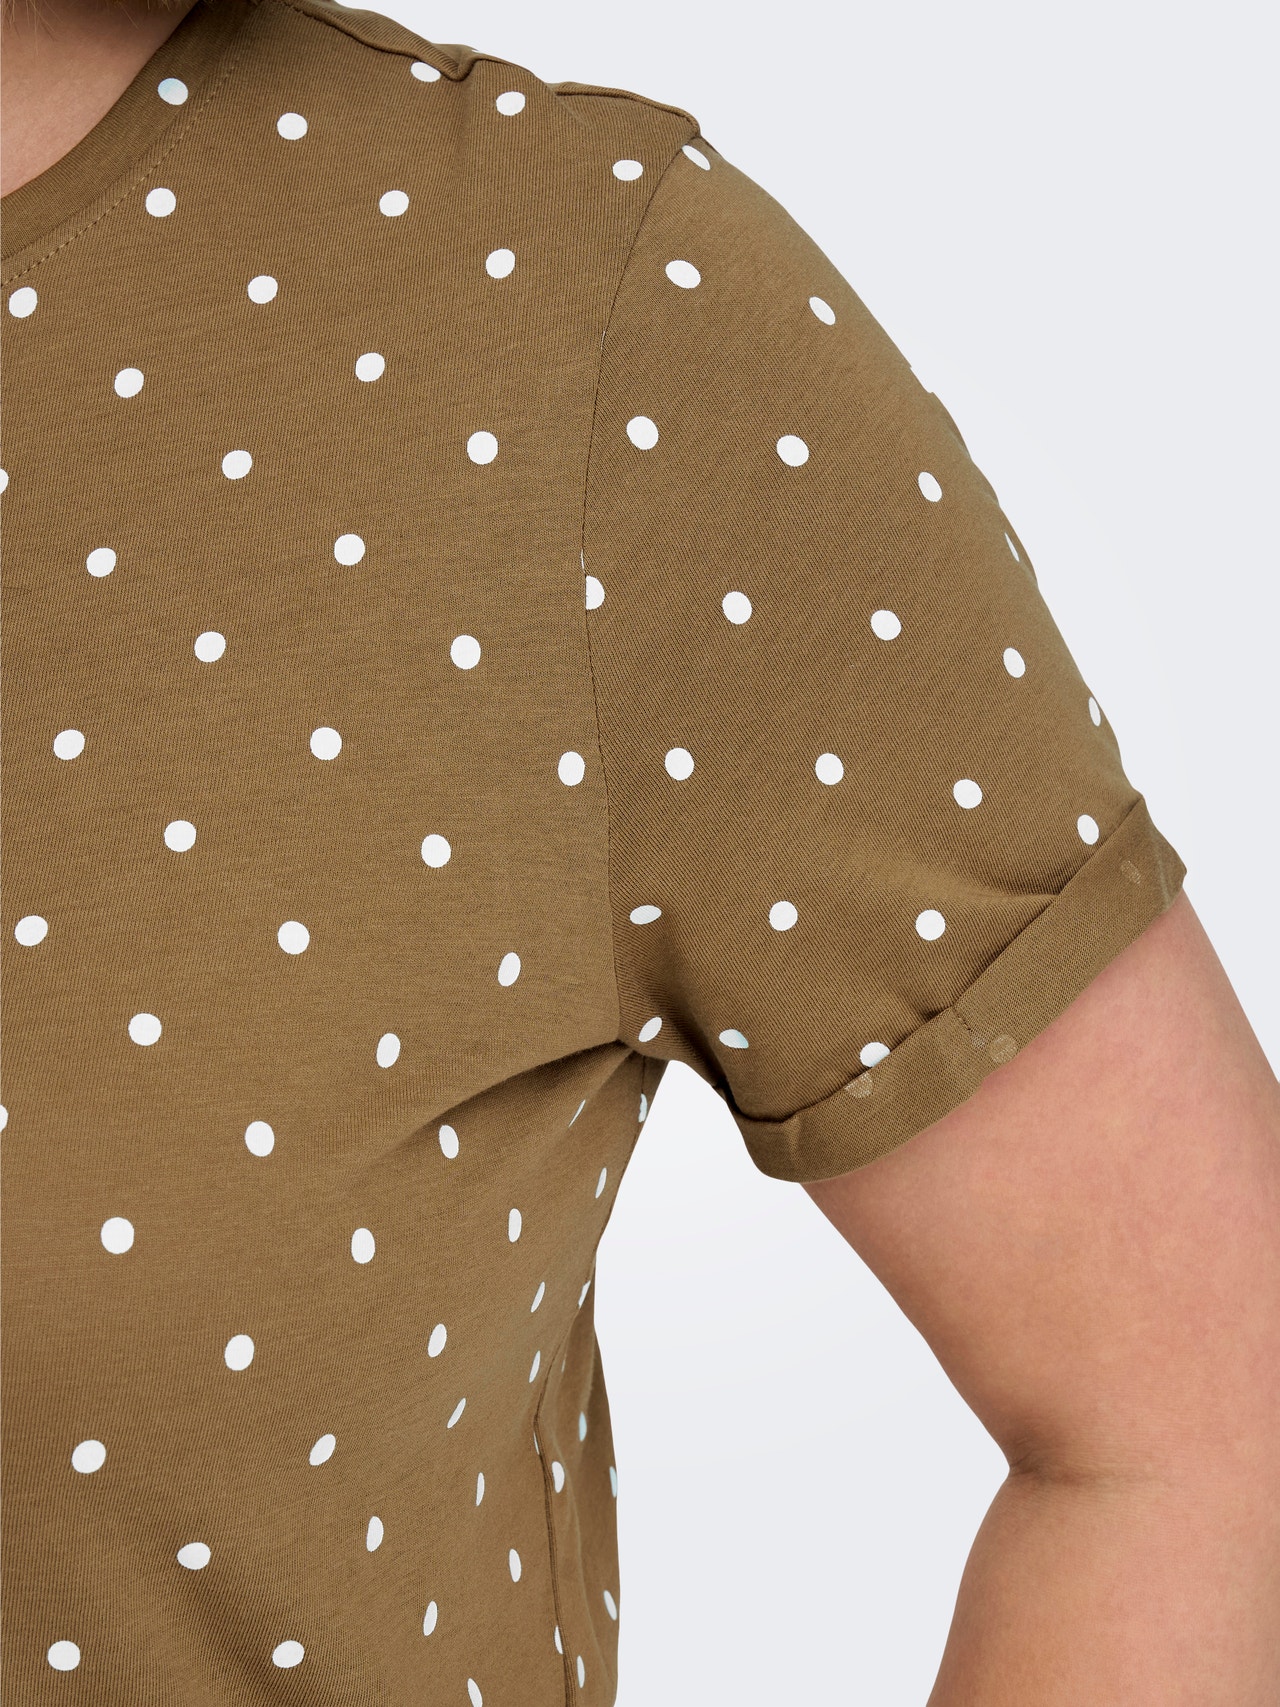 ONLY Curvy dotted t-shirt -Toasted Coconut - 15290406